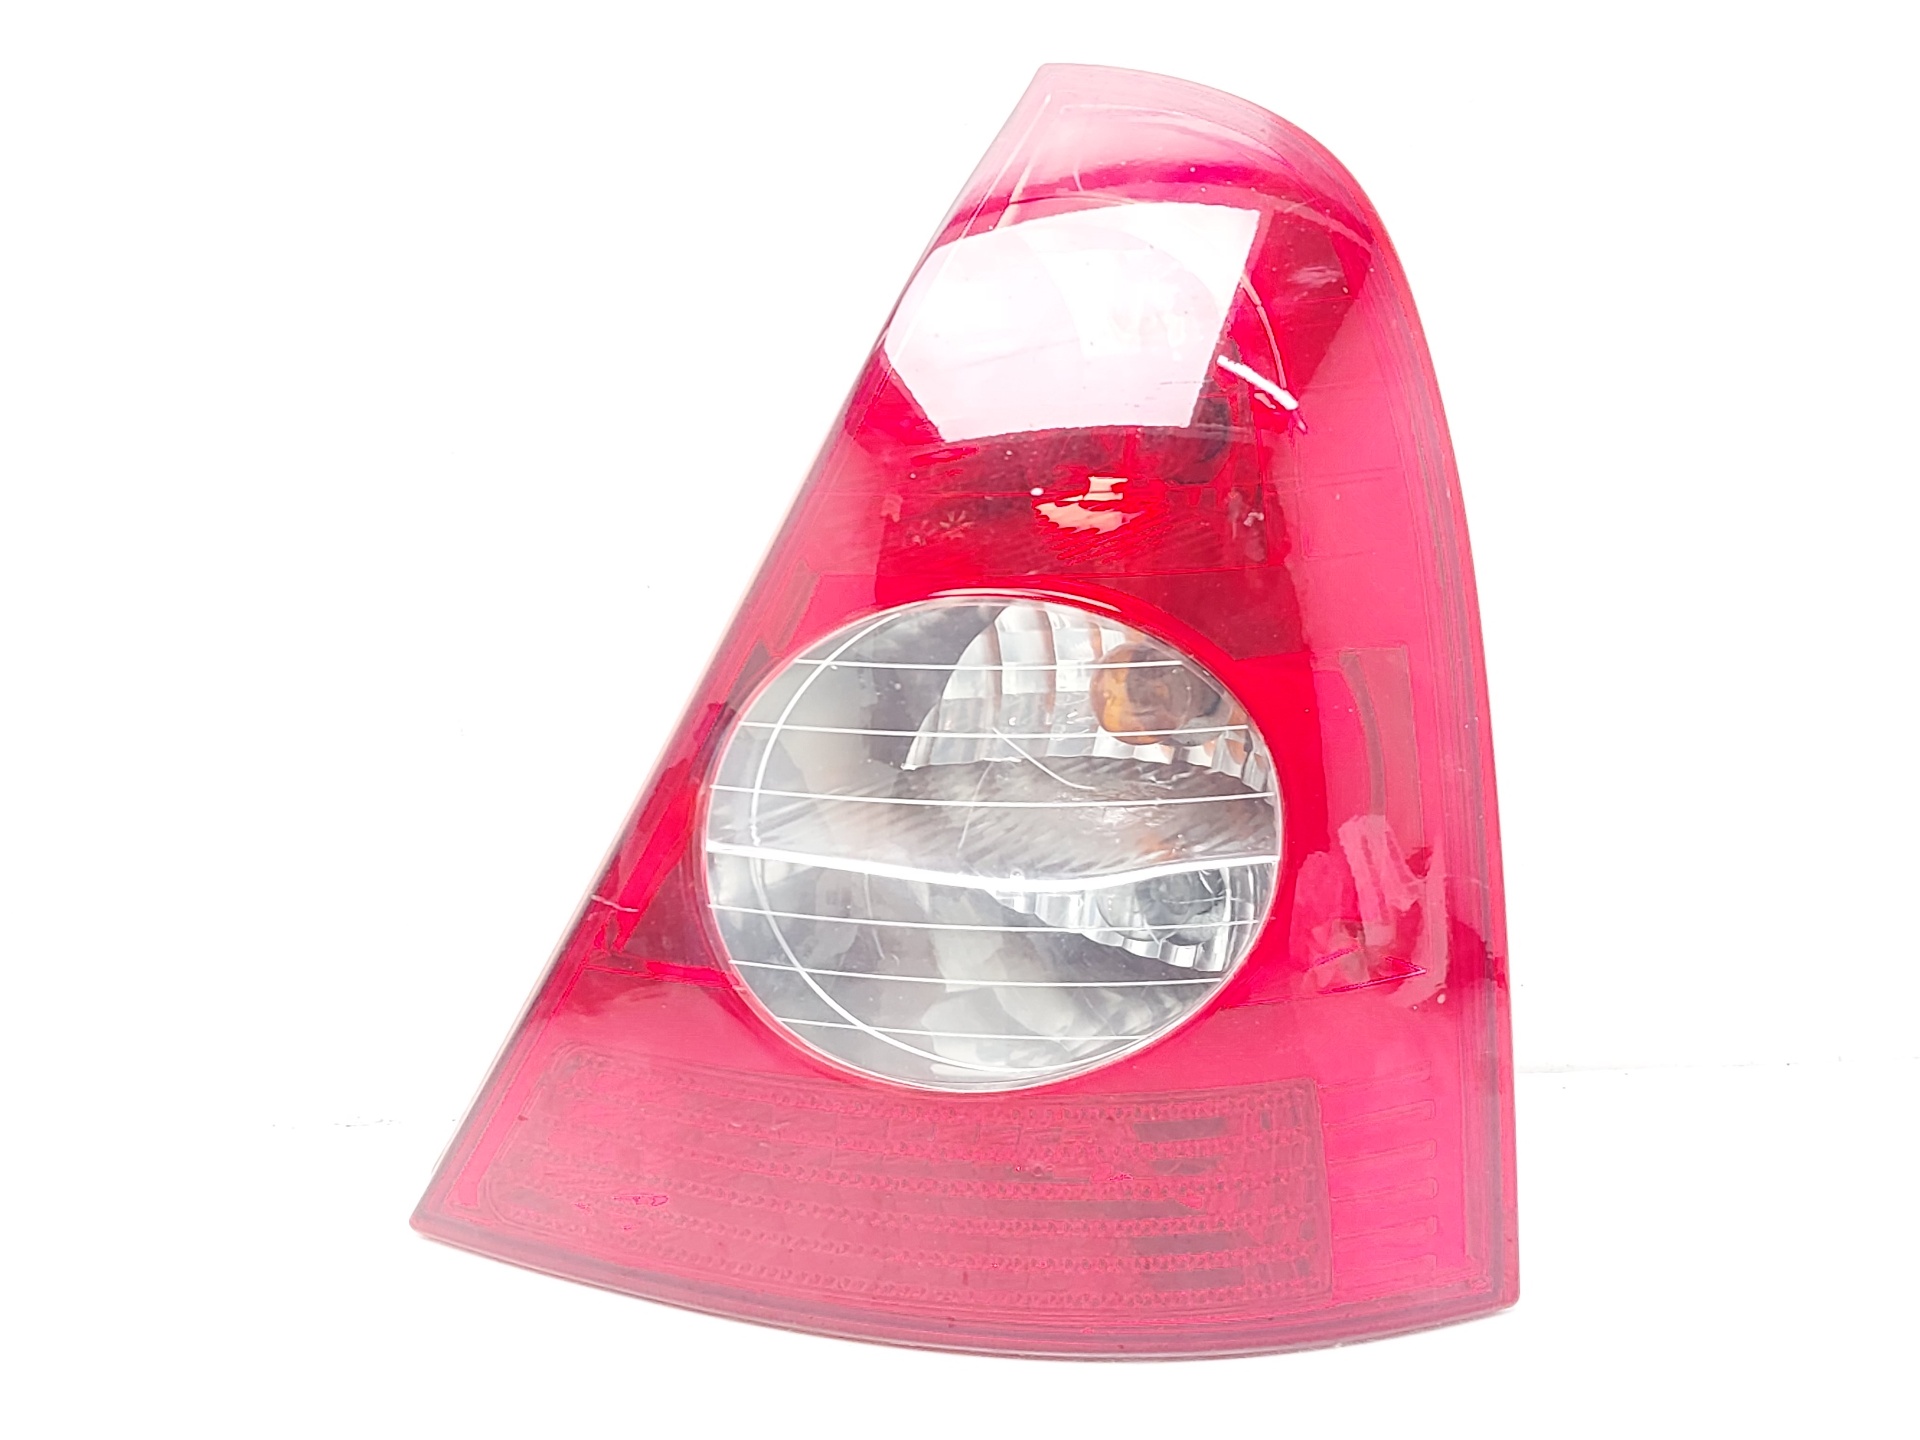 RENAULT Clio 2 generation (1998-2013) Rear Right Taillight Lamp 8200917487 20515749